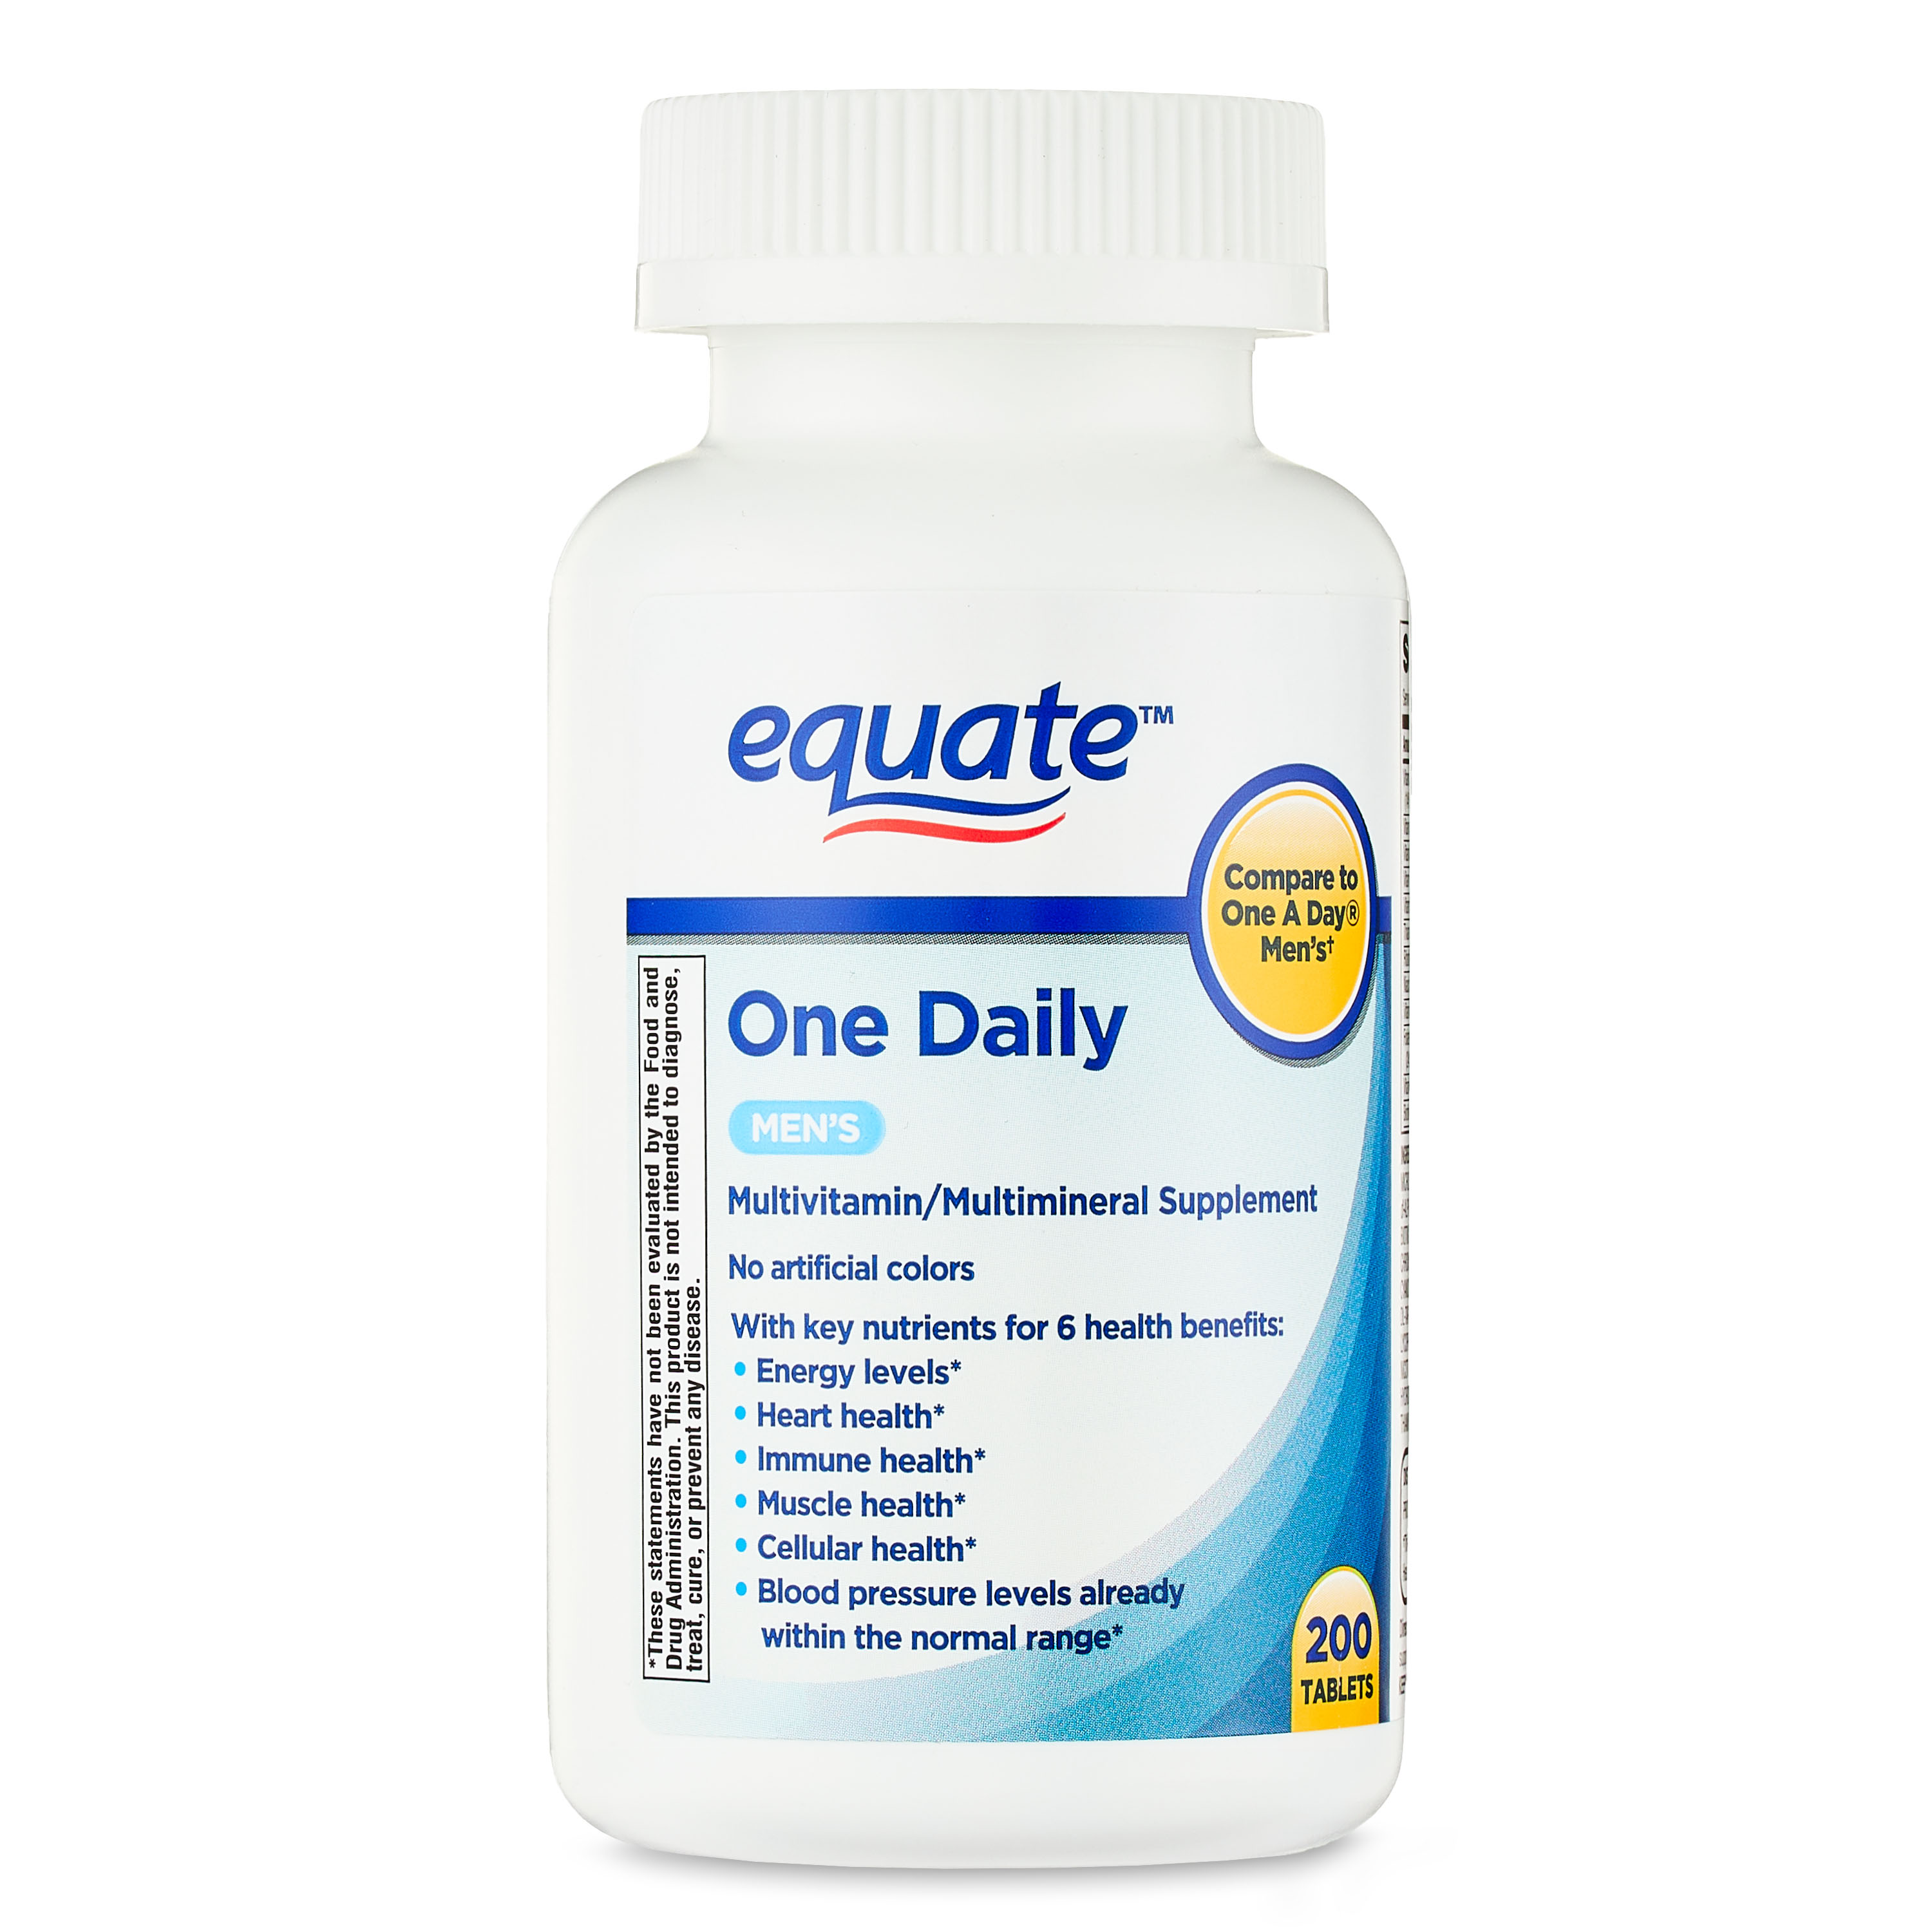 Equate One Daily Men's Multivitamin/Multimineral Supplement Tablets, 200 Count - image 1 of 10